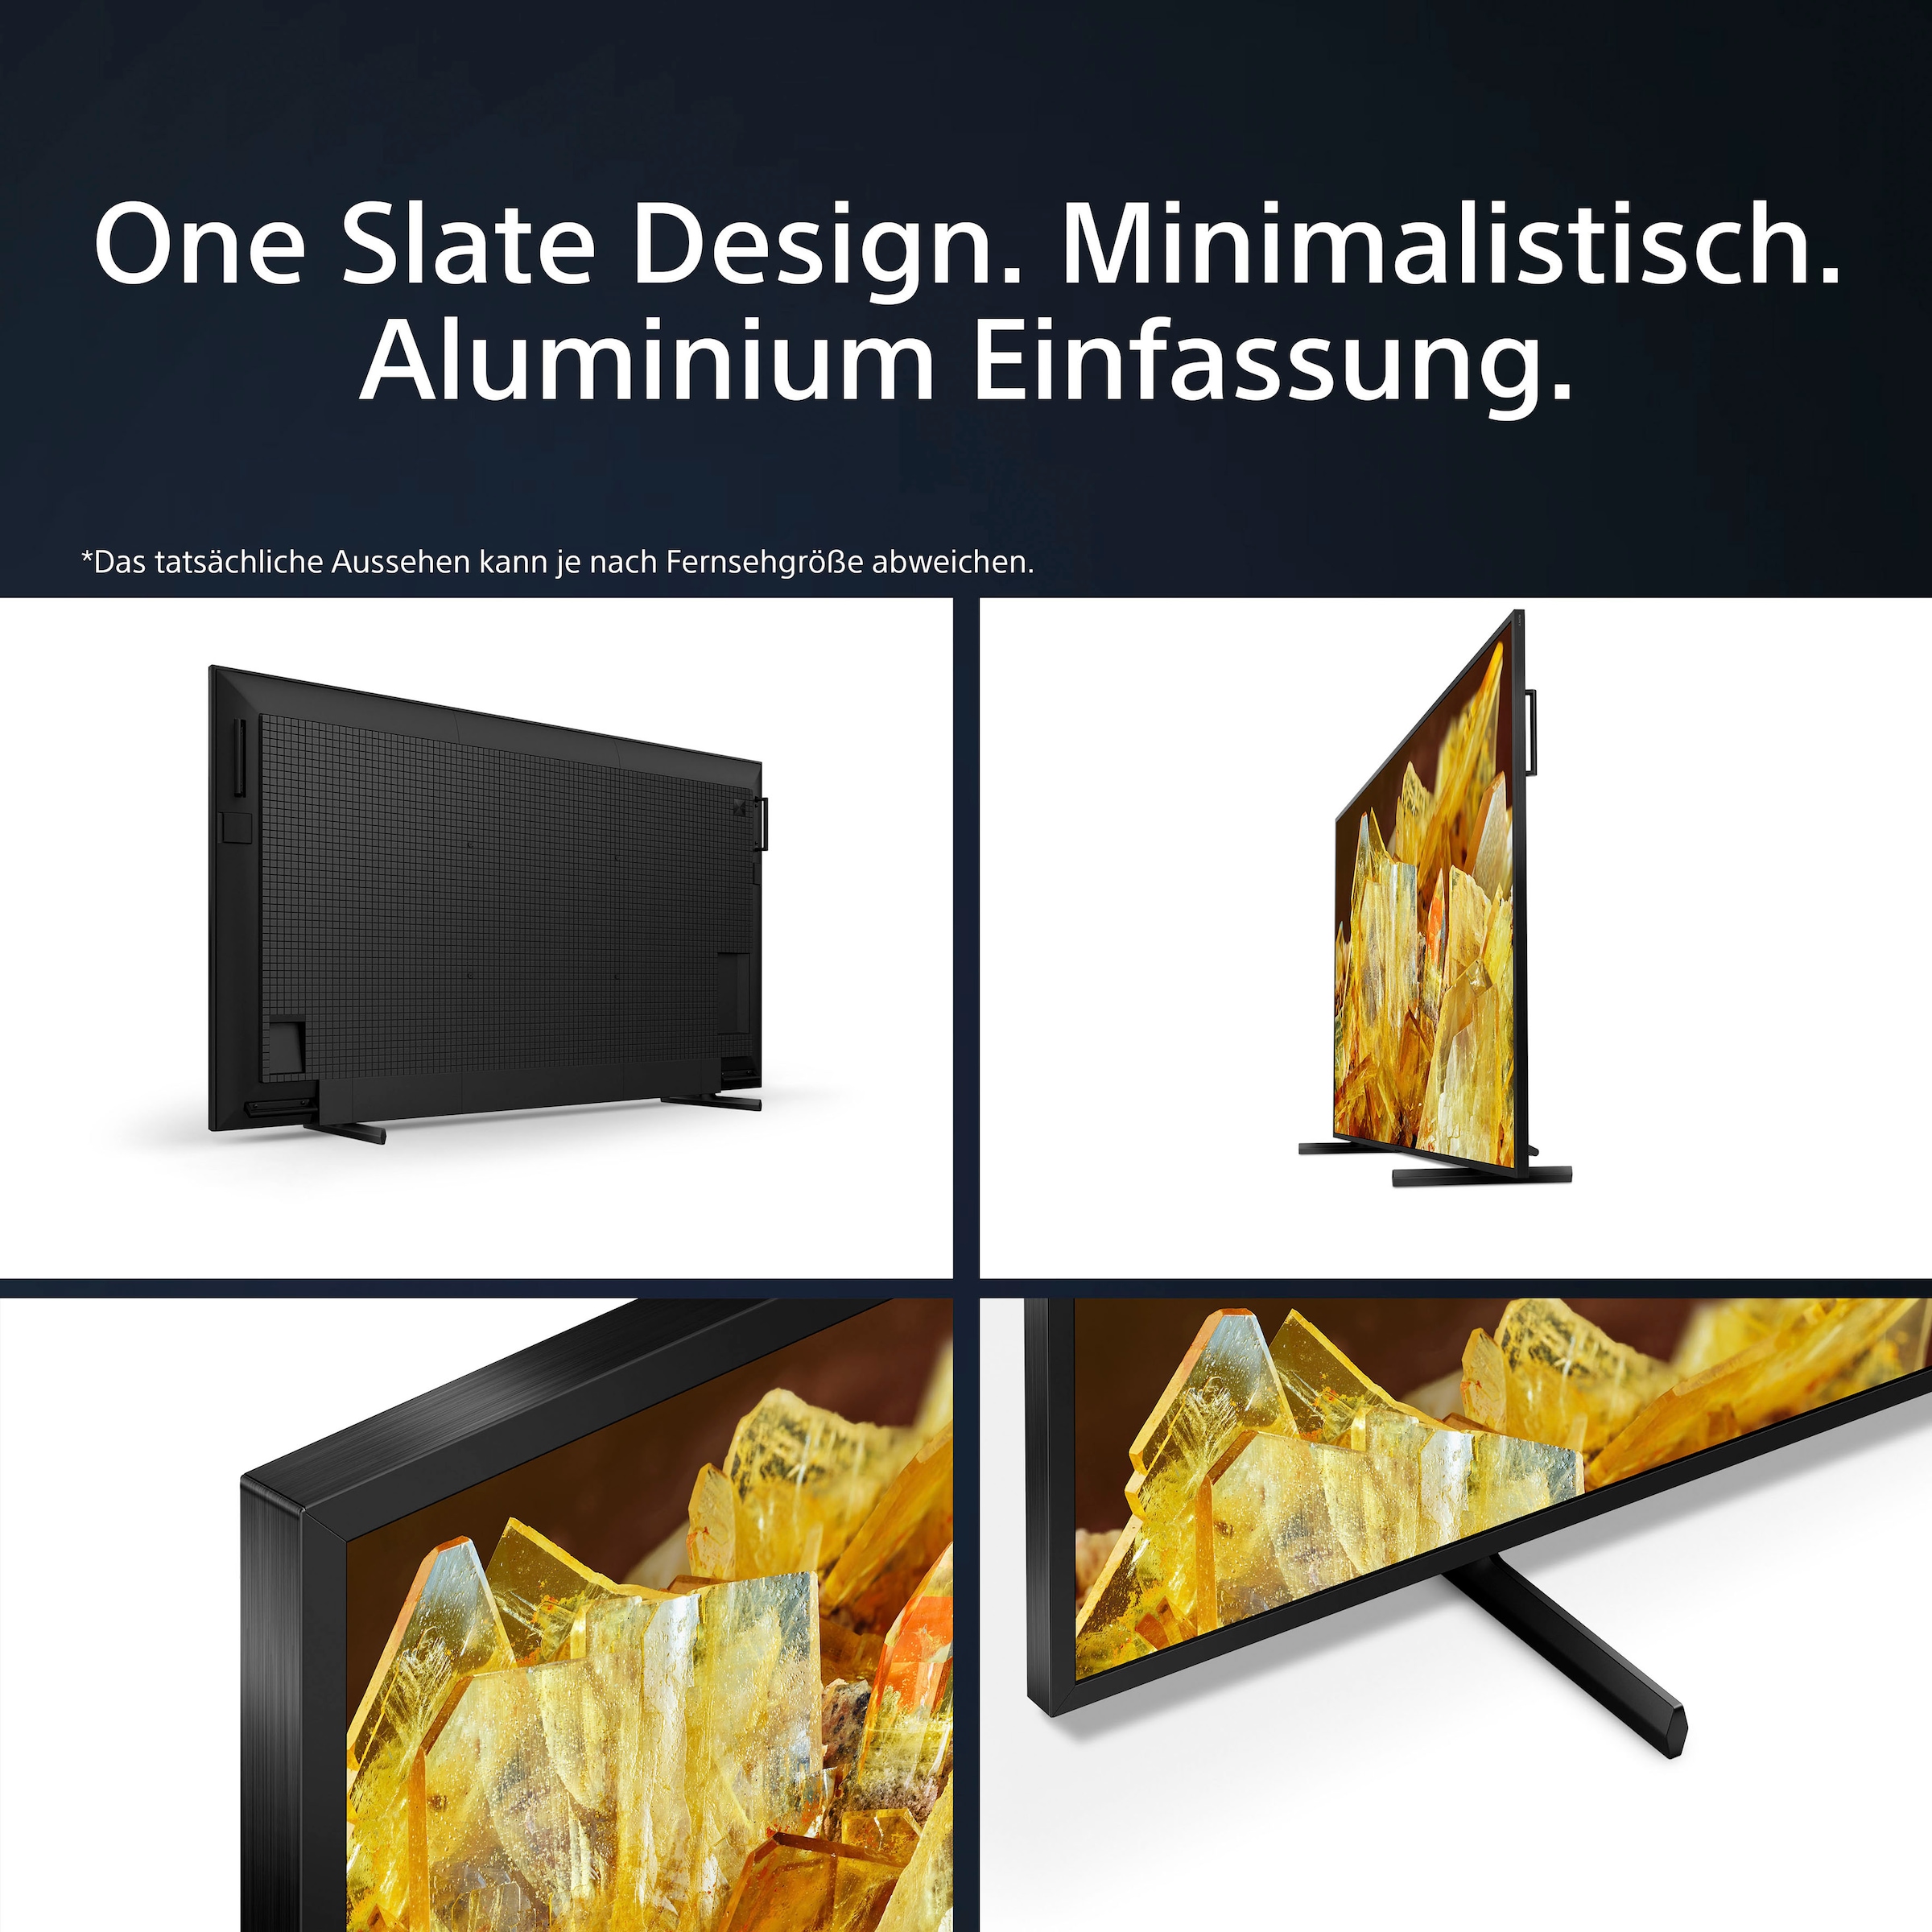 Sony LED-Fernseher, 248 cm/98 Zoll, 4K Ultra HD, Google TV, TRILUMINOS PRO, BRAVIA CORE, mit exklusiven PS5-Features